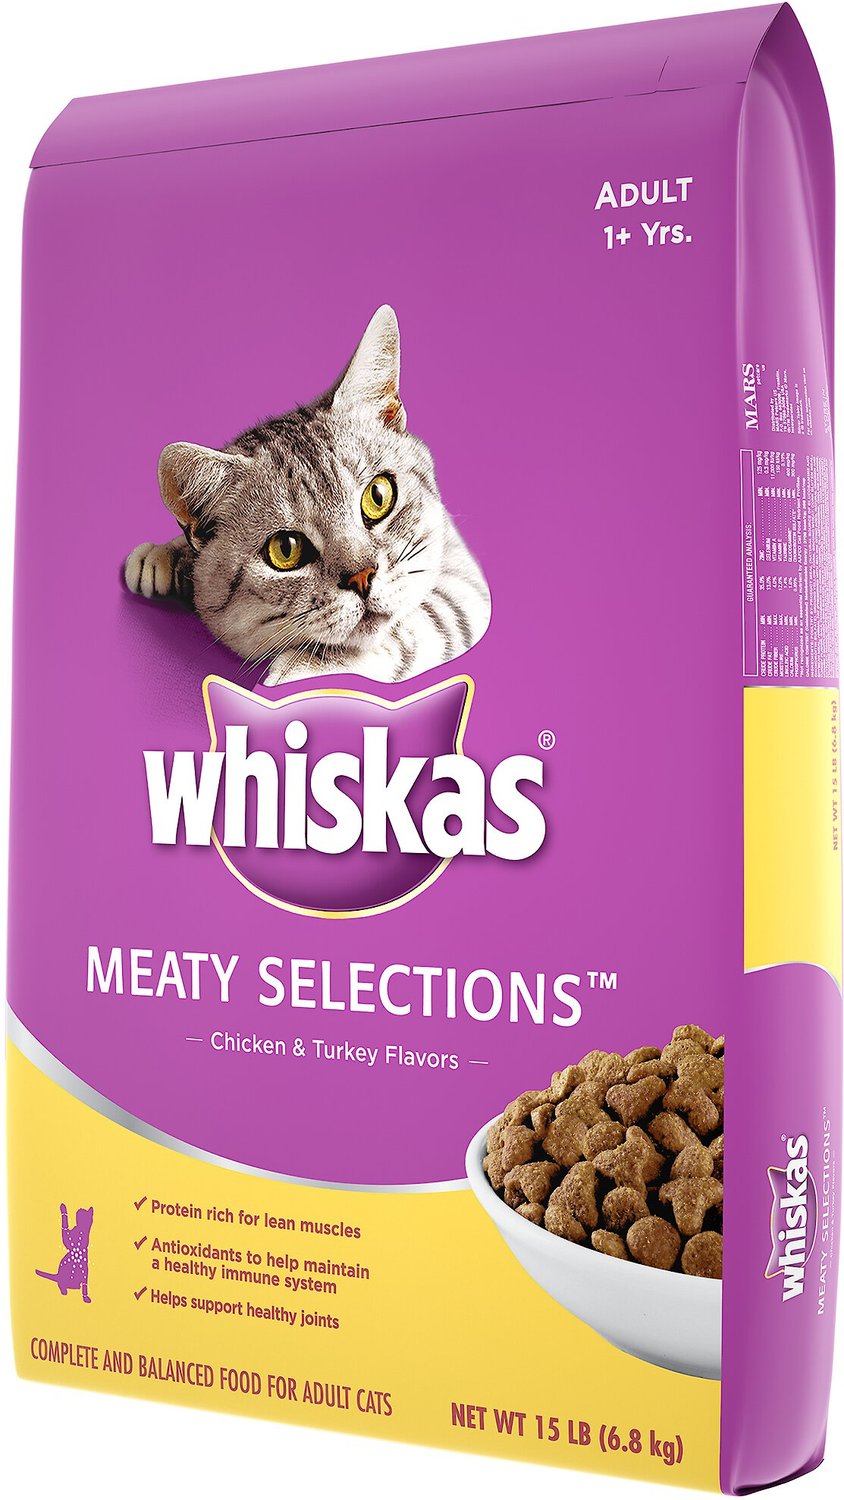 Whiskas Meaty Selections Chicken & Turkey Flavors Dry Cat Food, 15lb